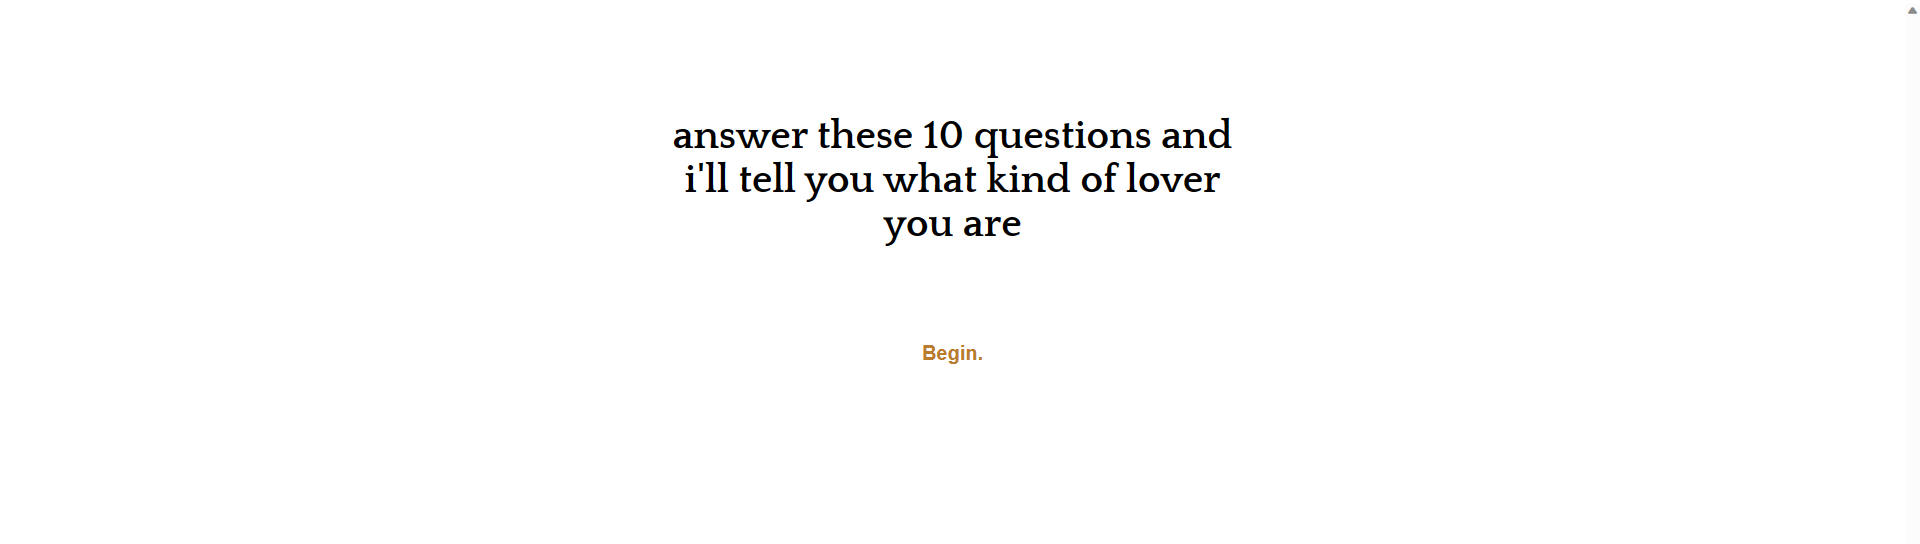 Screenshot from the game 'answer these 10 questions...'